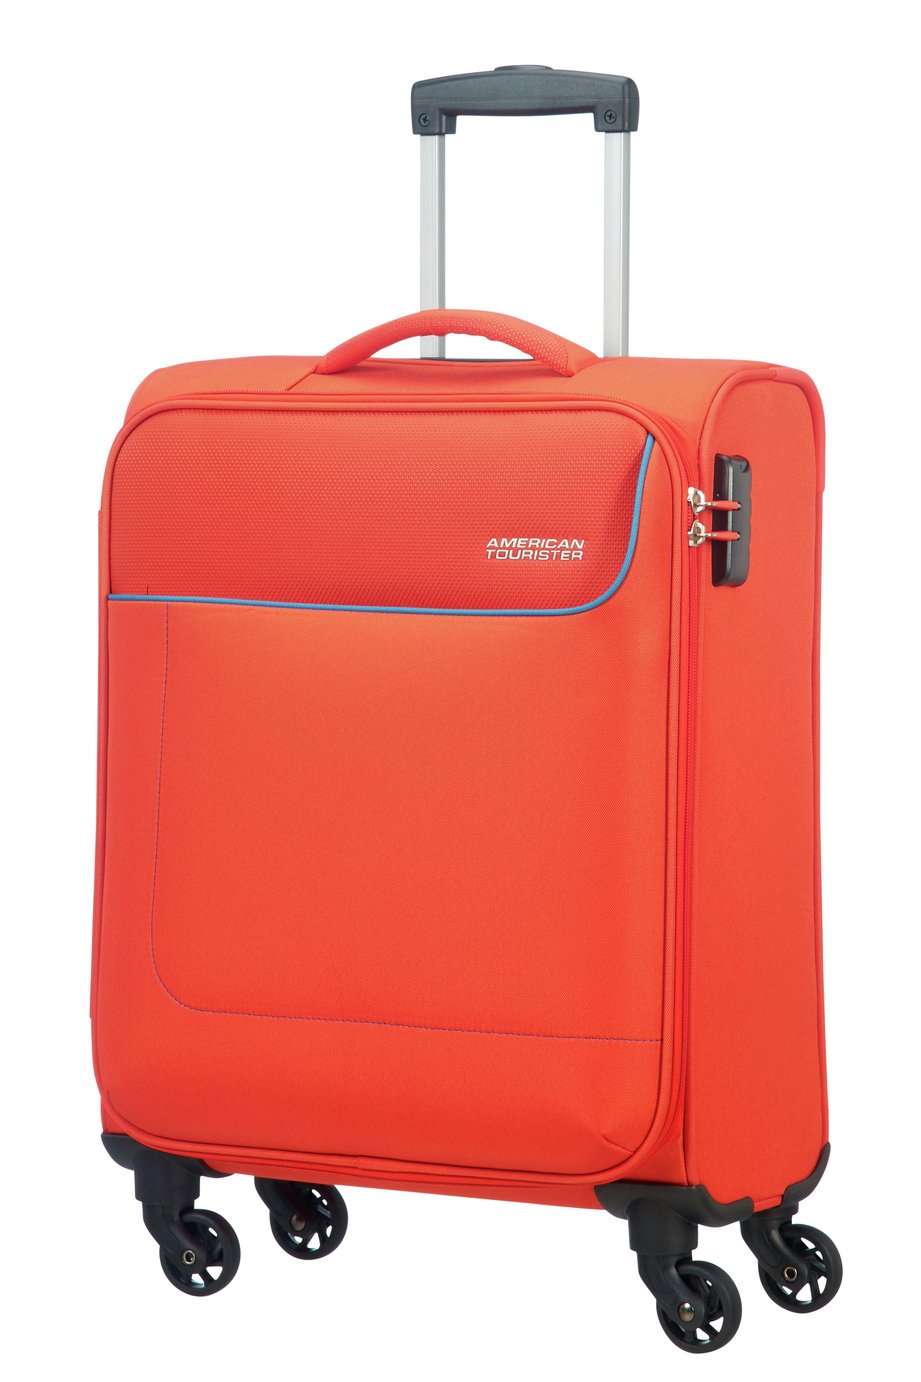 American Tourister Funshine Soft Cabin Suitcase Reviews Updated